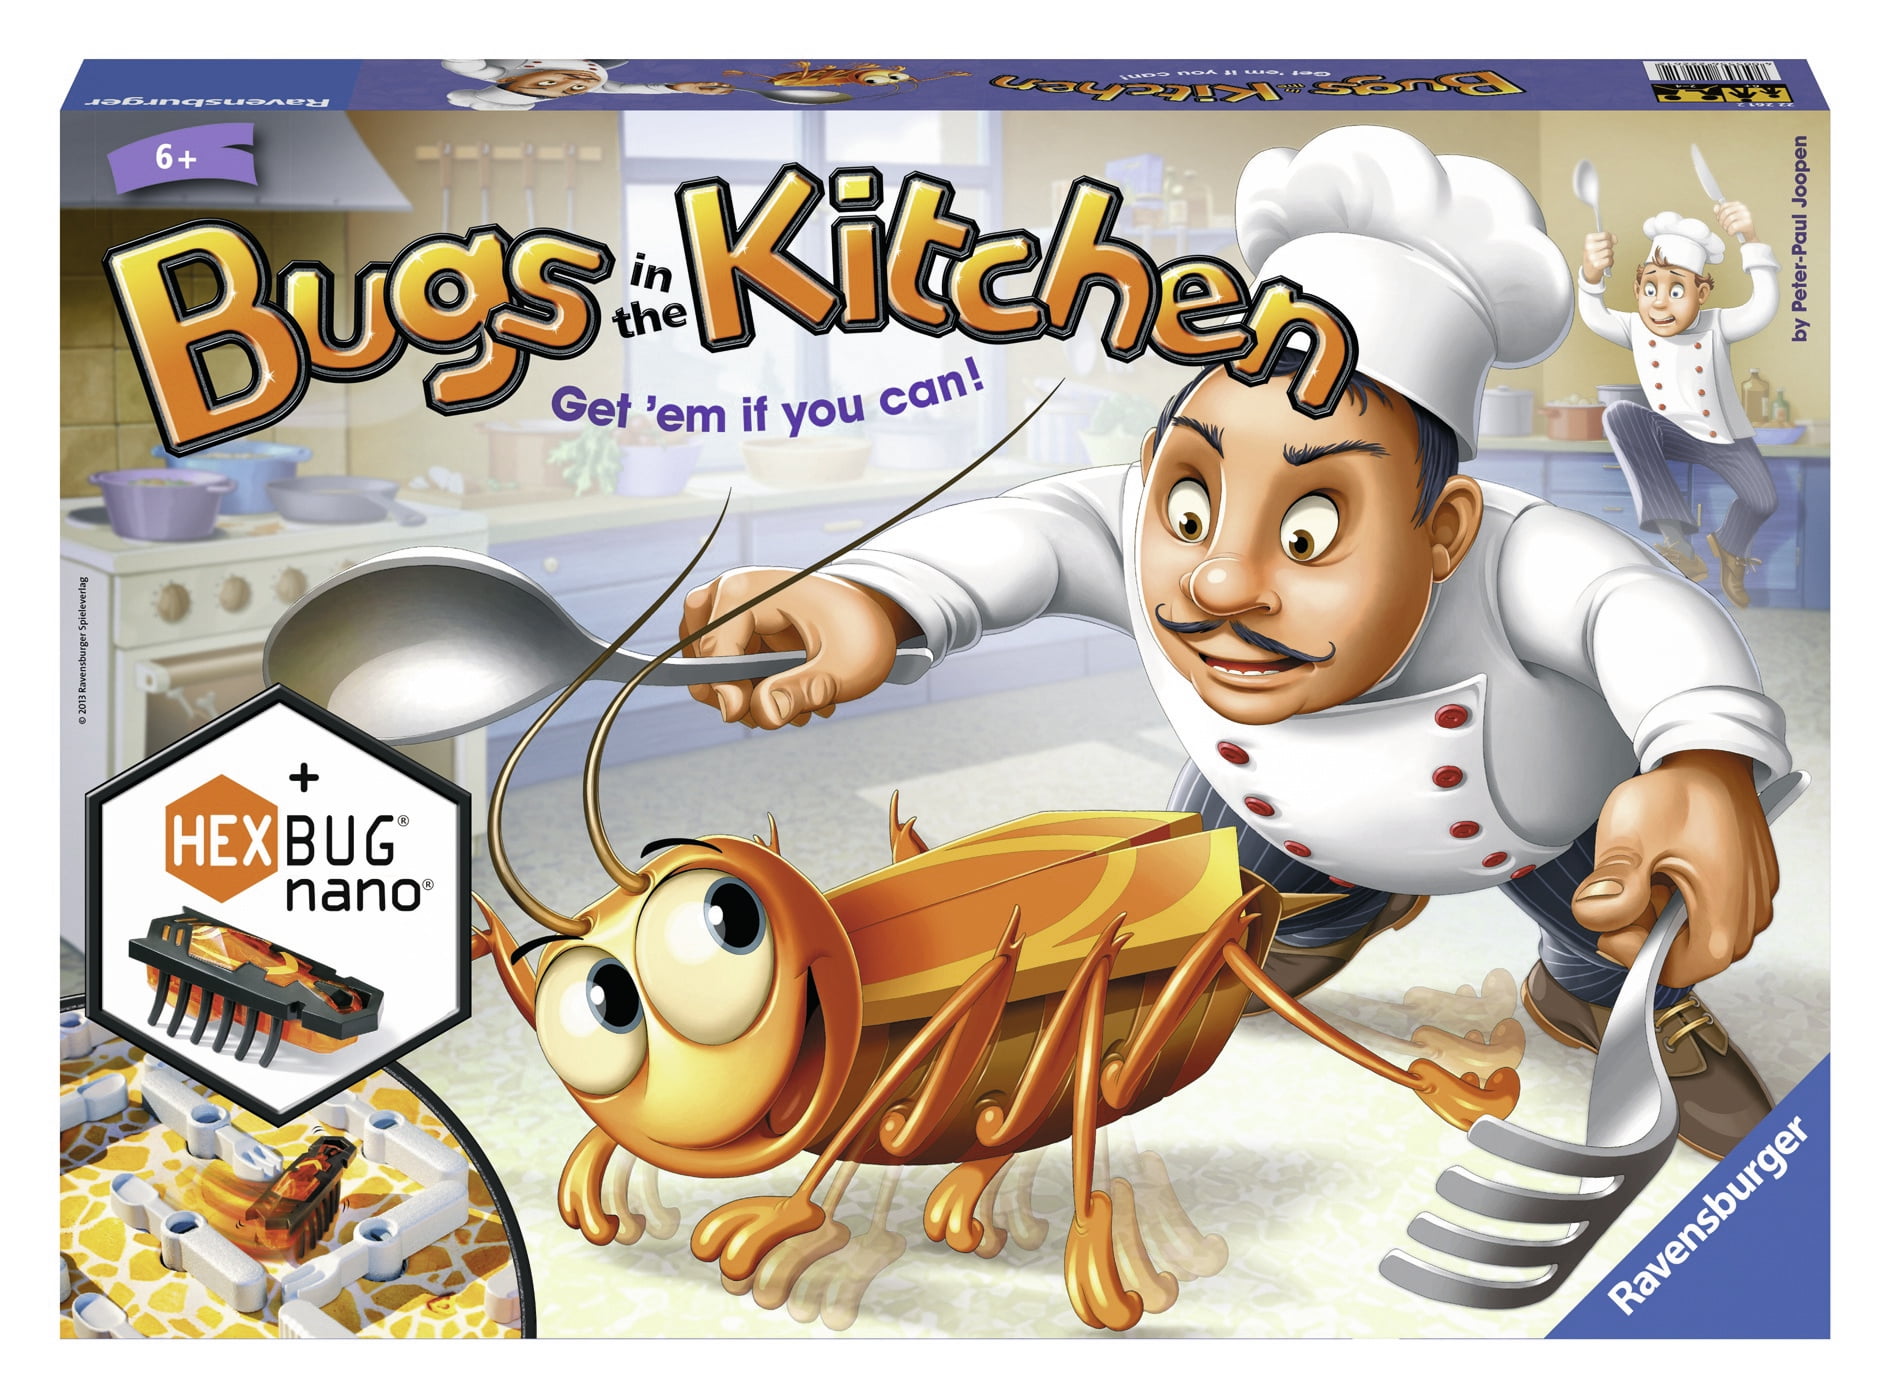 Ravensburger Bugs In The Kitchen Family Board Game 71bcbb2b 37f1 468a 9e1c 8163e8c3b4e6 1.82460a36008f3fd5db73d1050deaee1b 